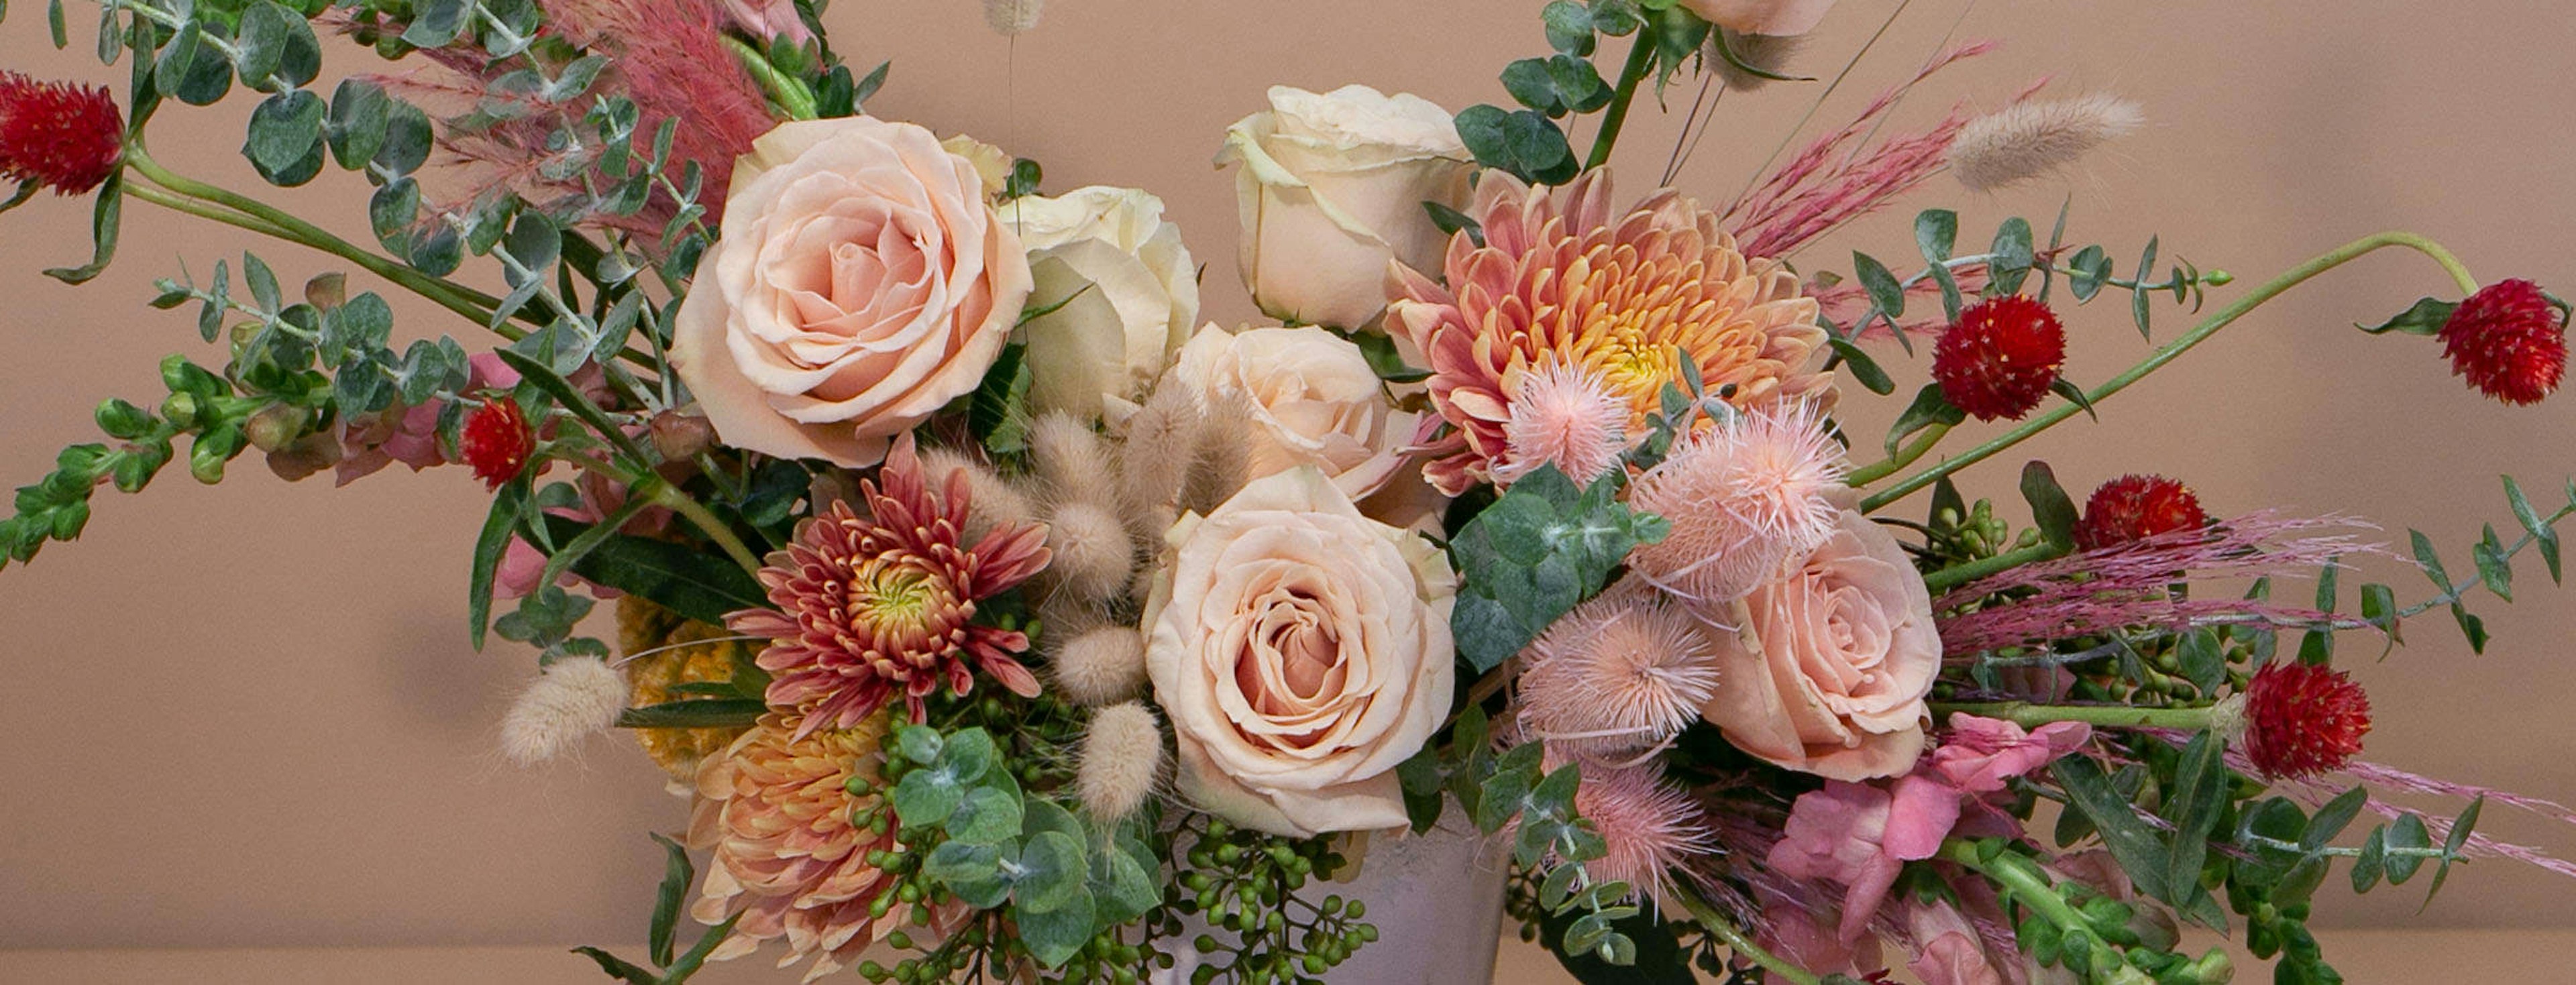 ENCHANT YOUR GUESTS WITH A MAGICAL FLORAL DESIGN